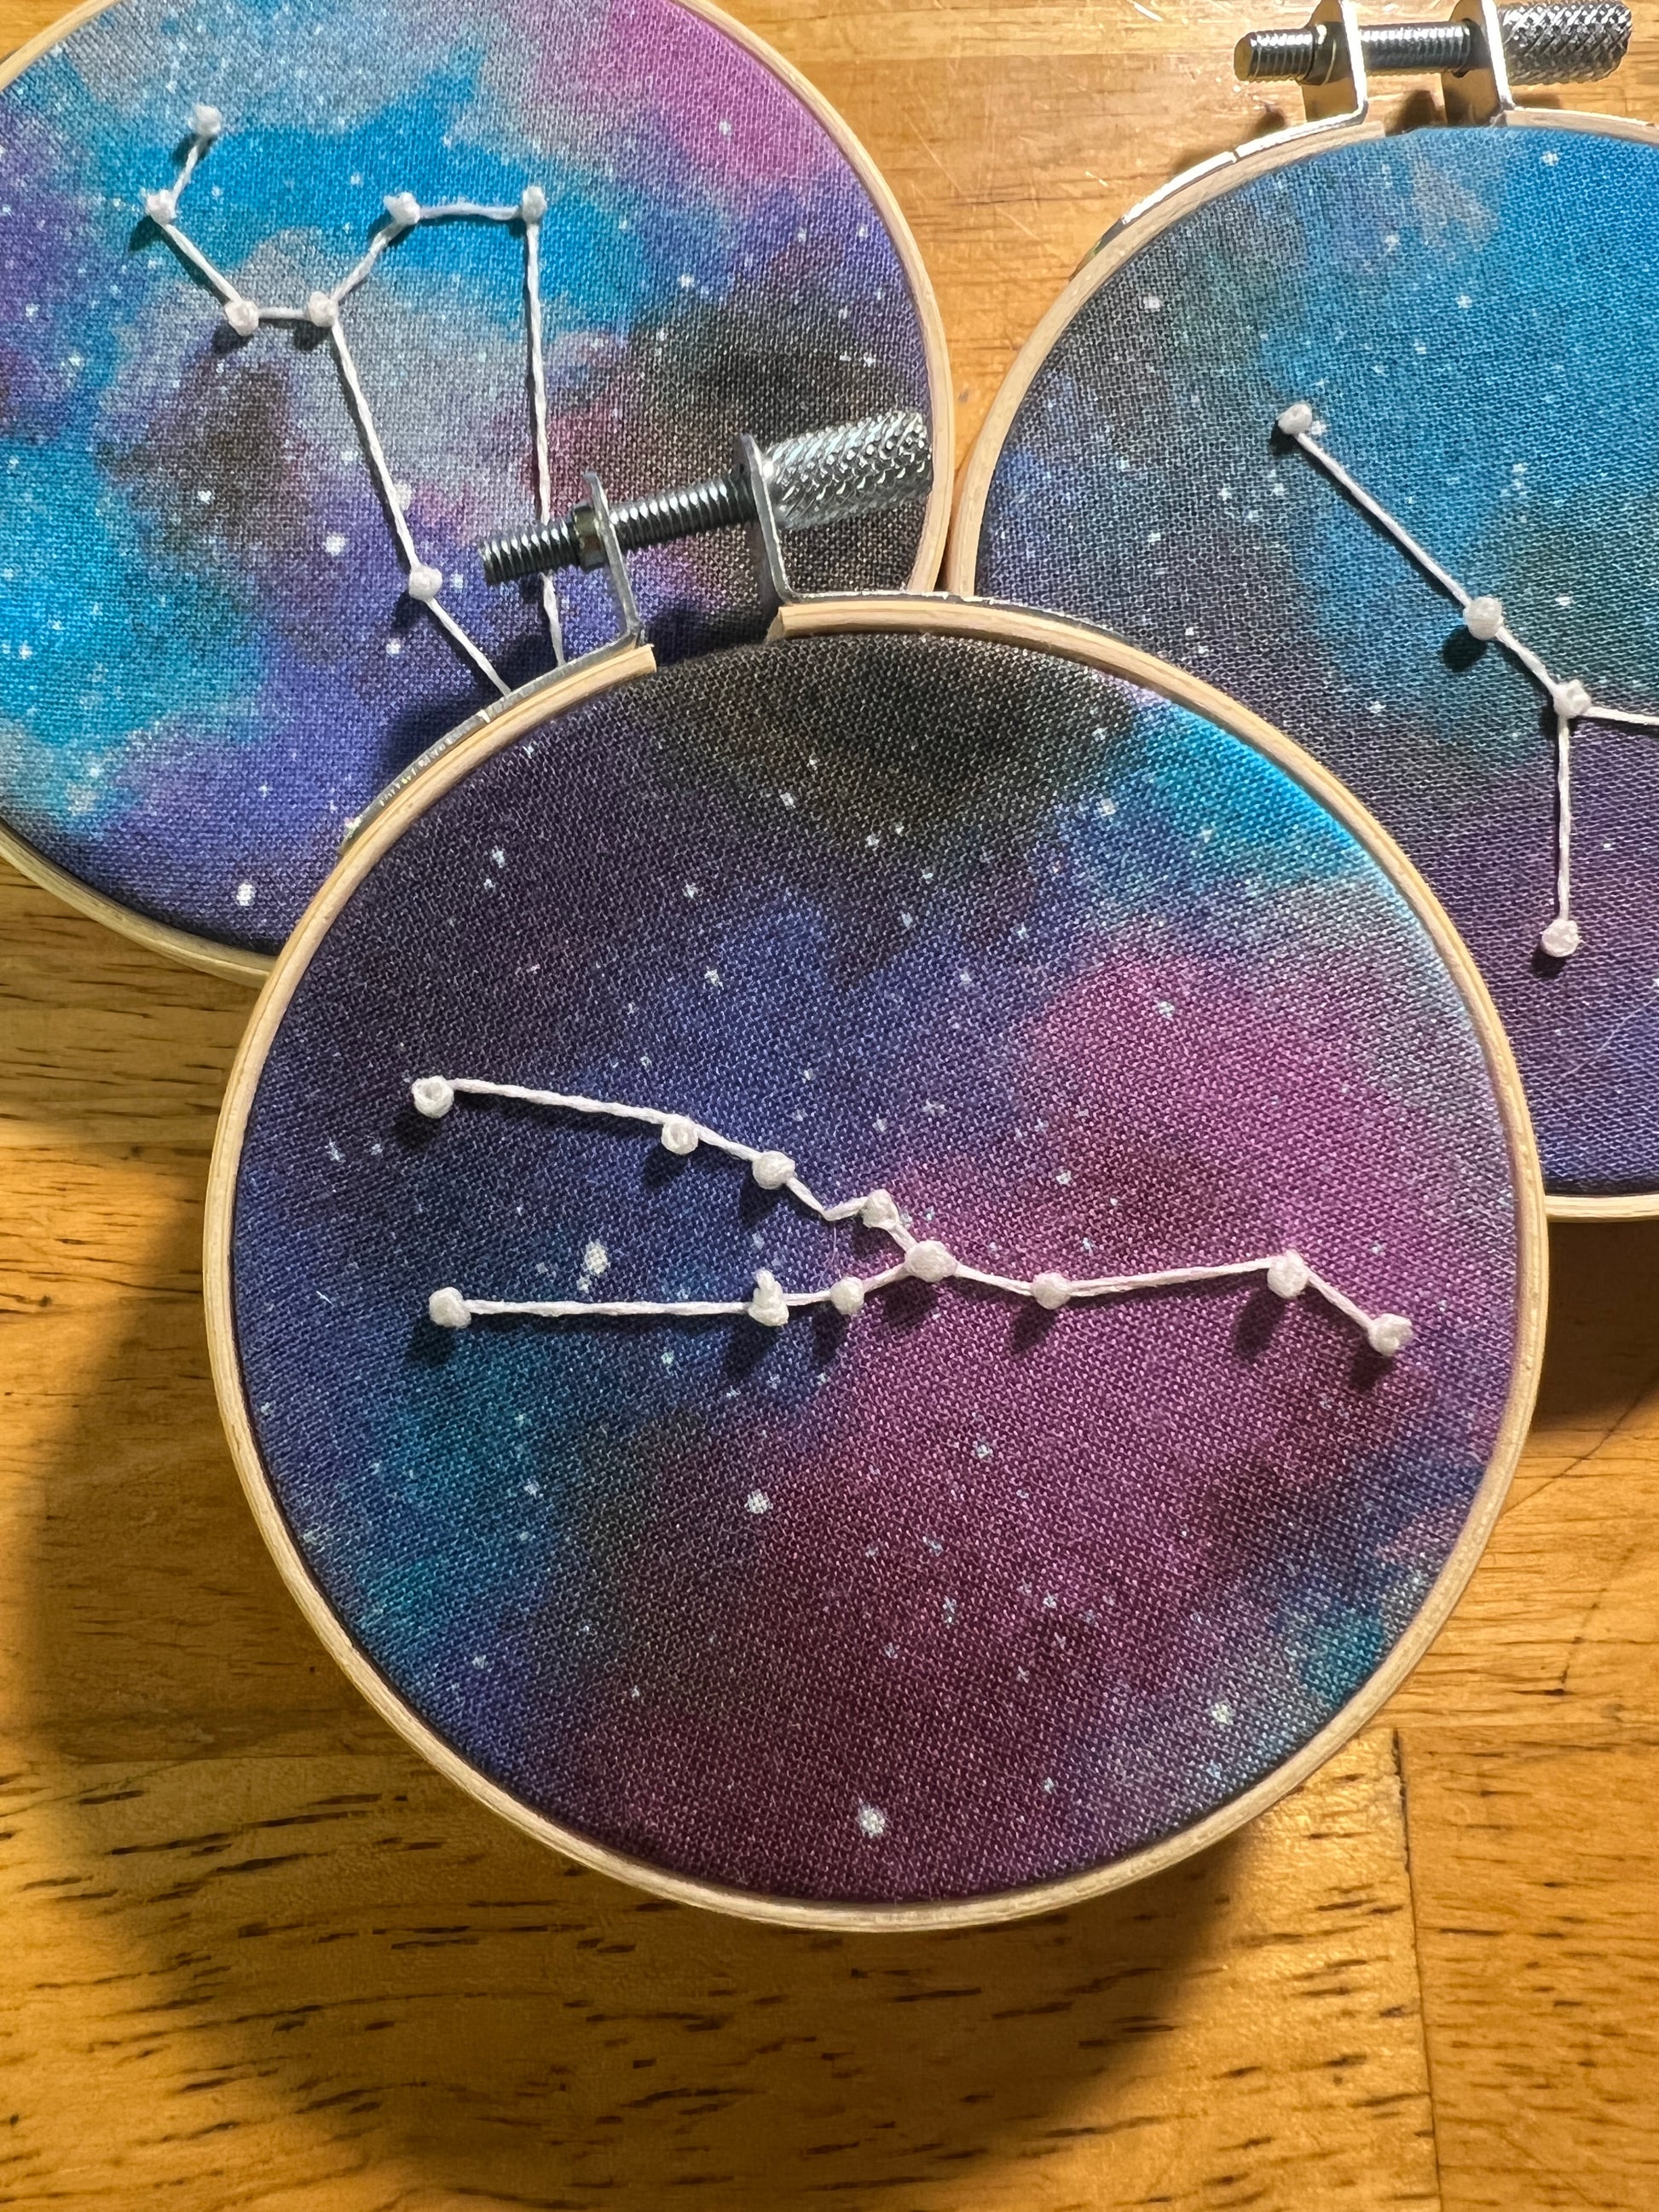 This Zodiac Embroidery Lights Up - Make